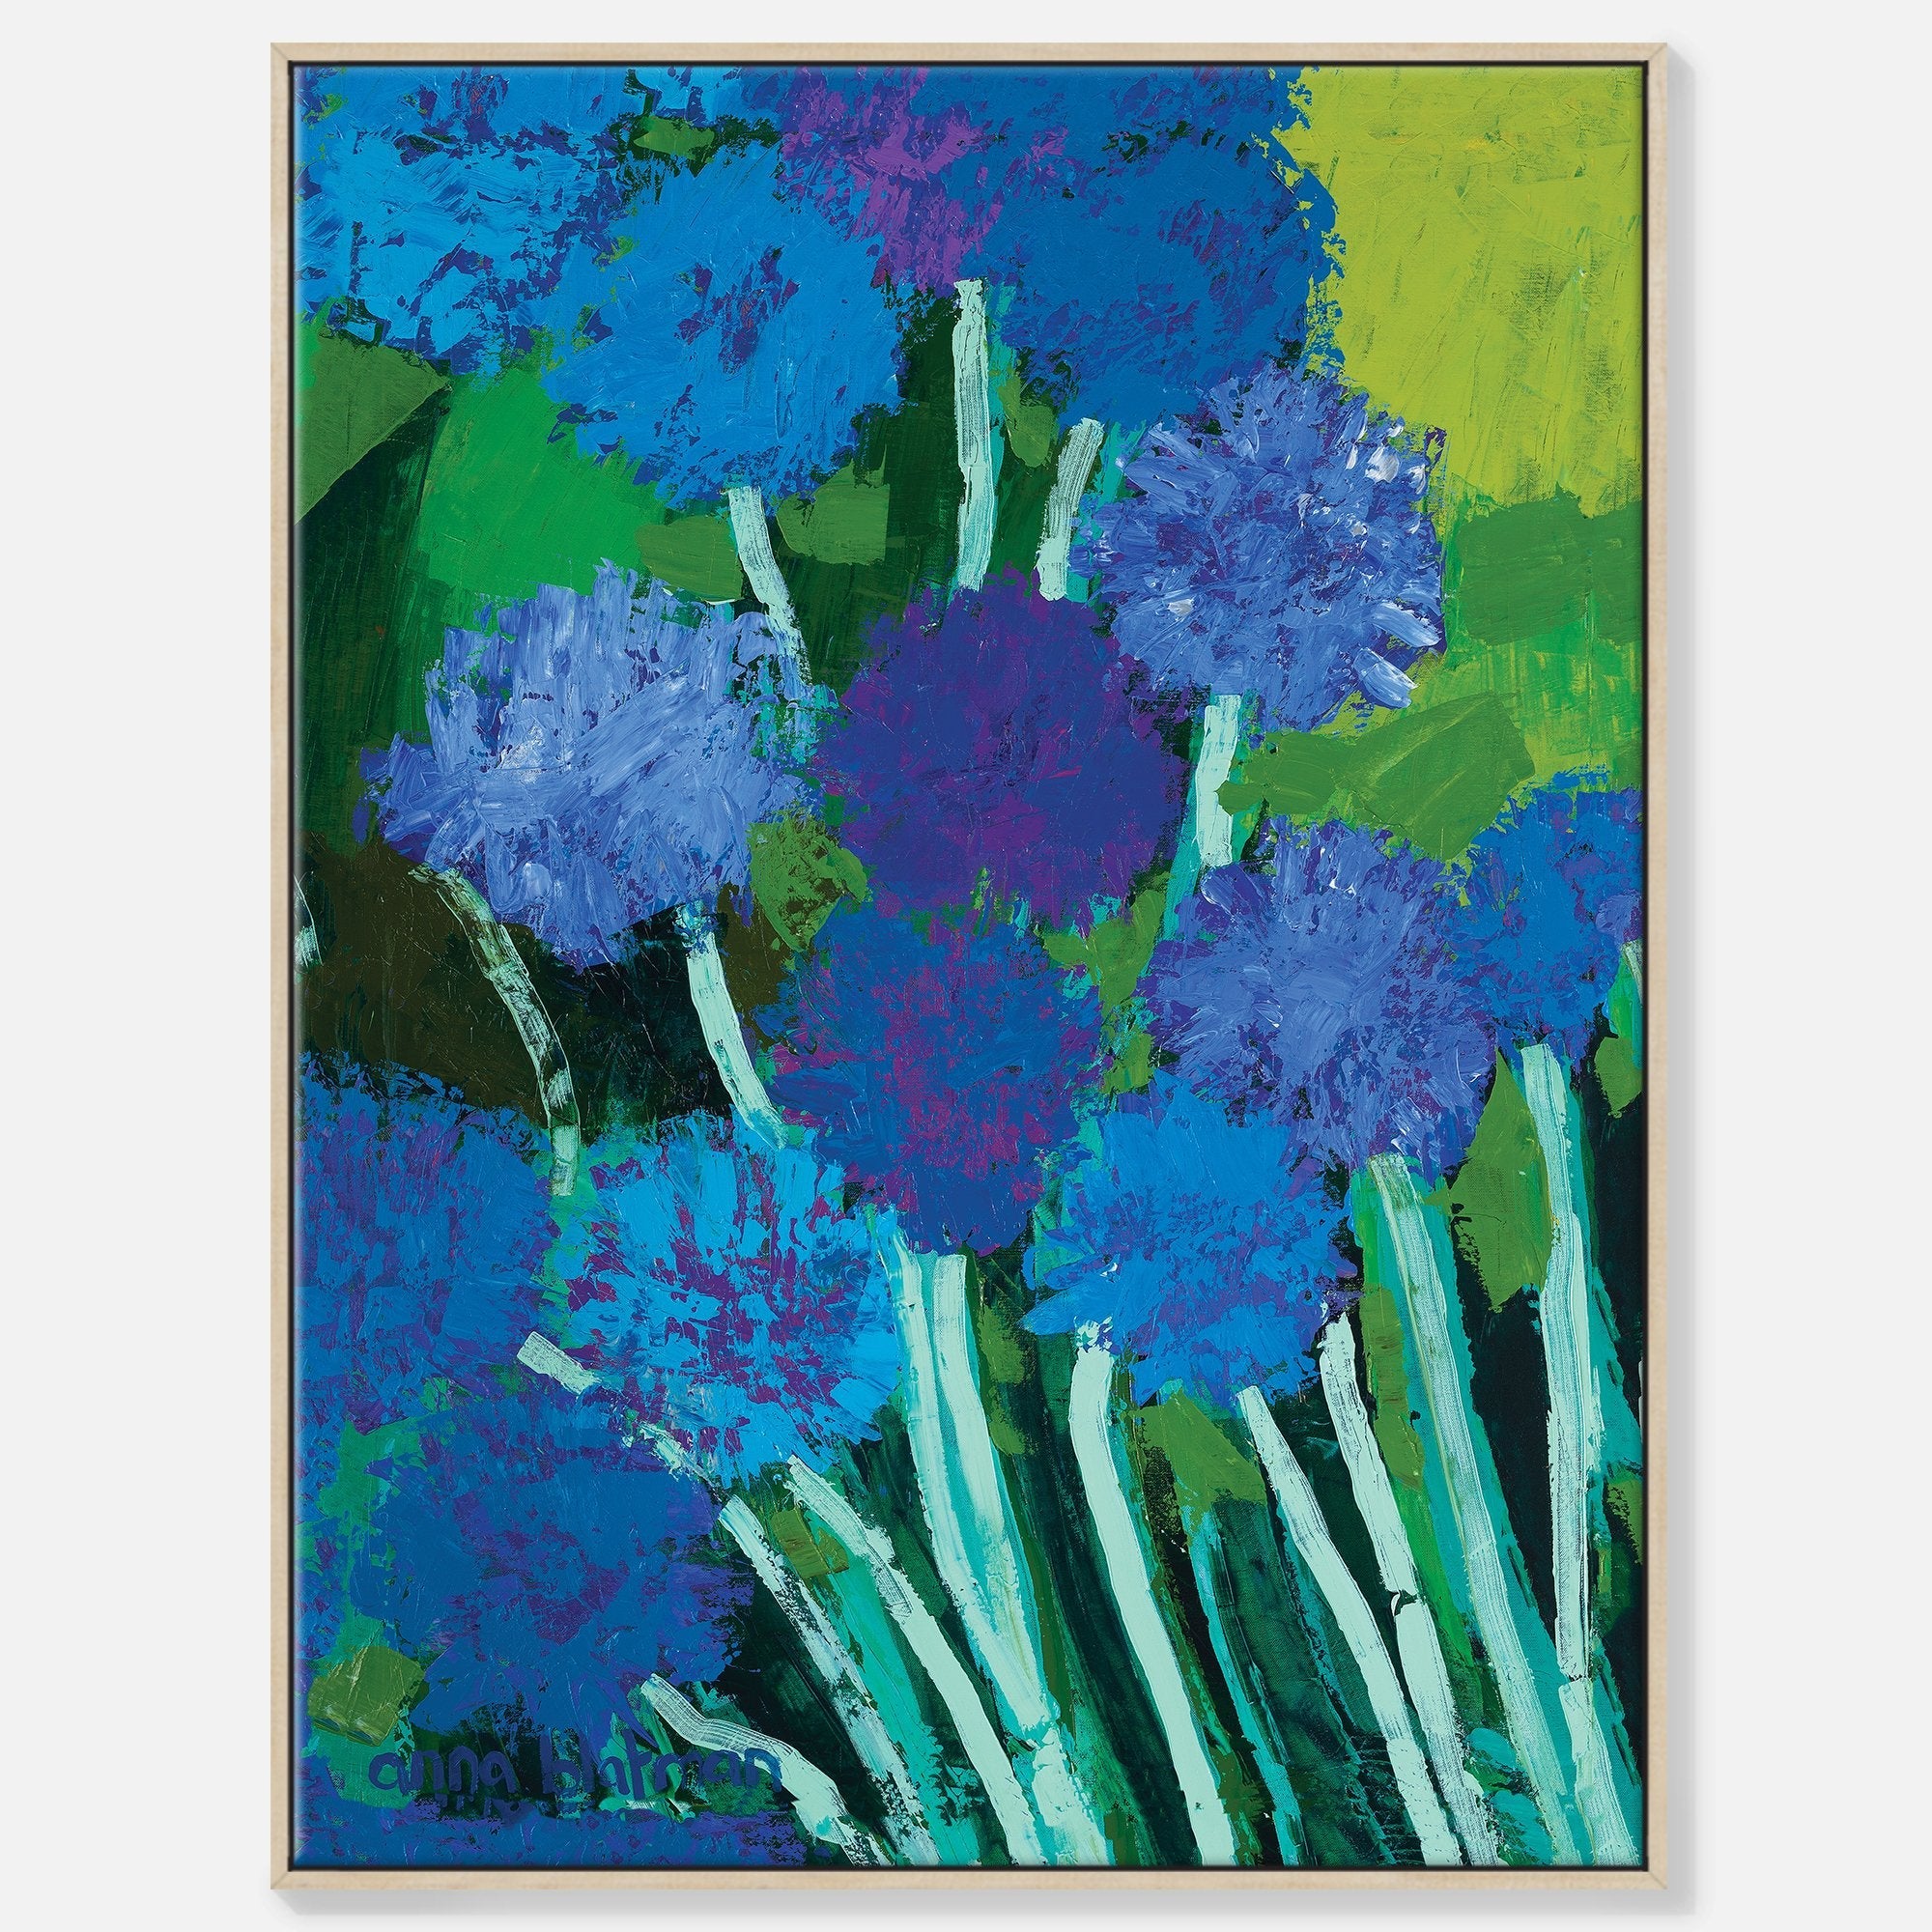 Adeline - Gallery Wrapped Canvas